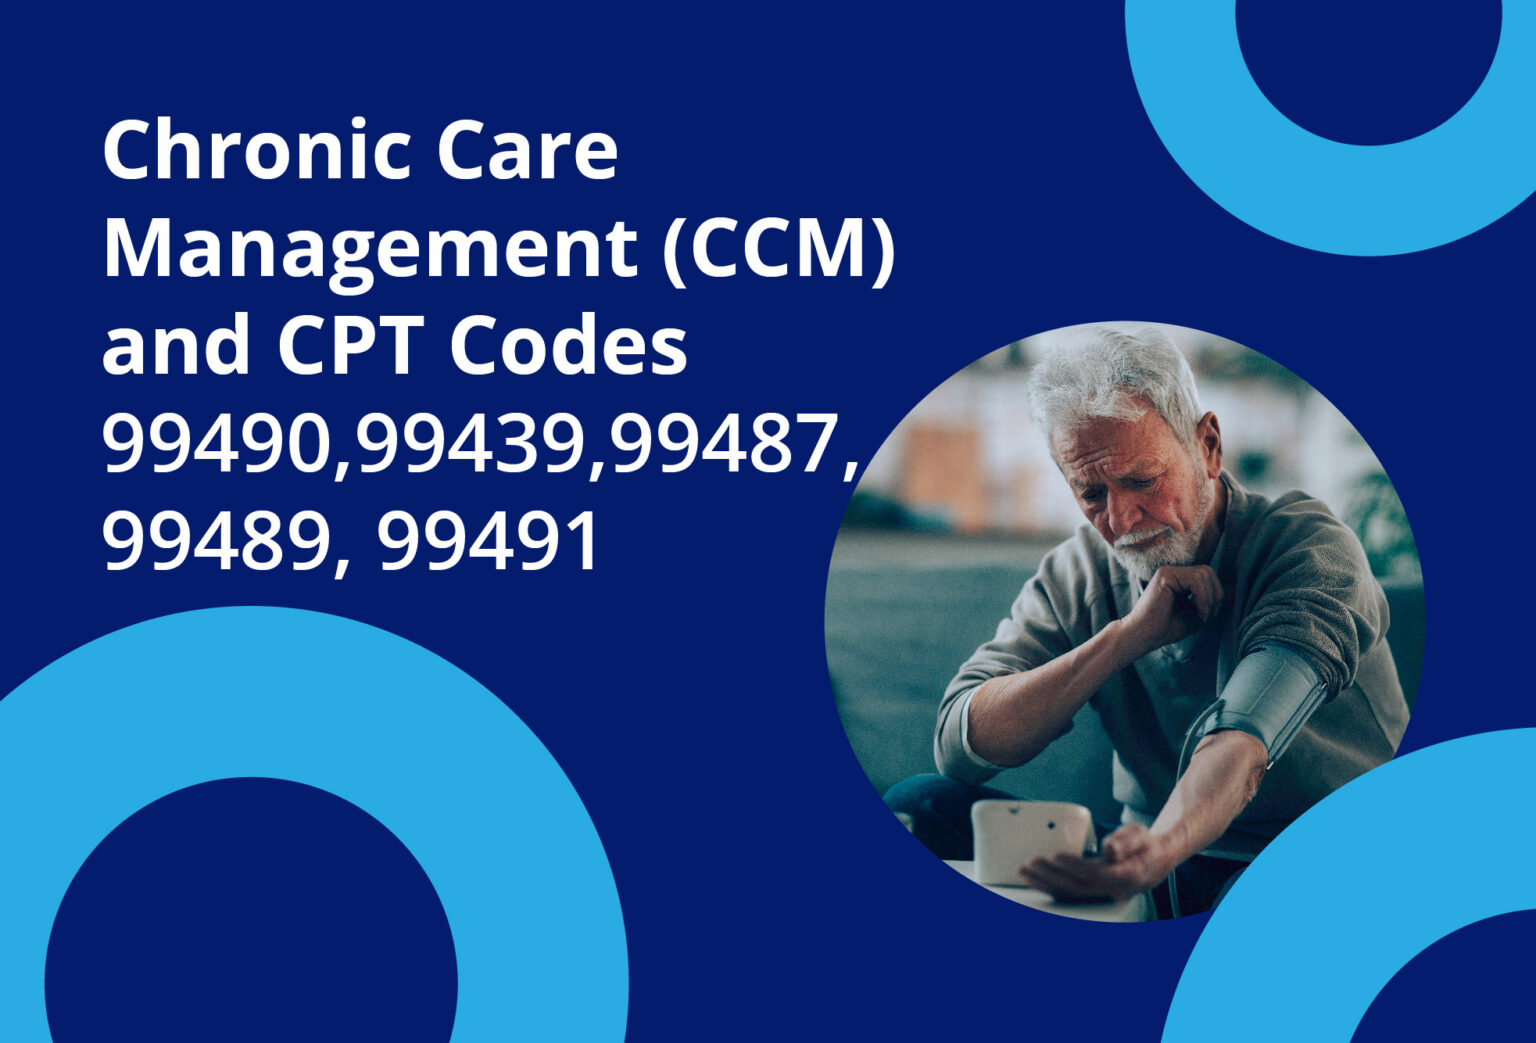 Chronic Care Management (CCM) and CPT Codes 99490, 99439, 99487, 99489